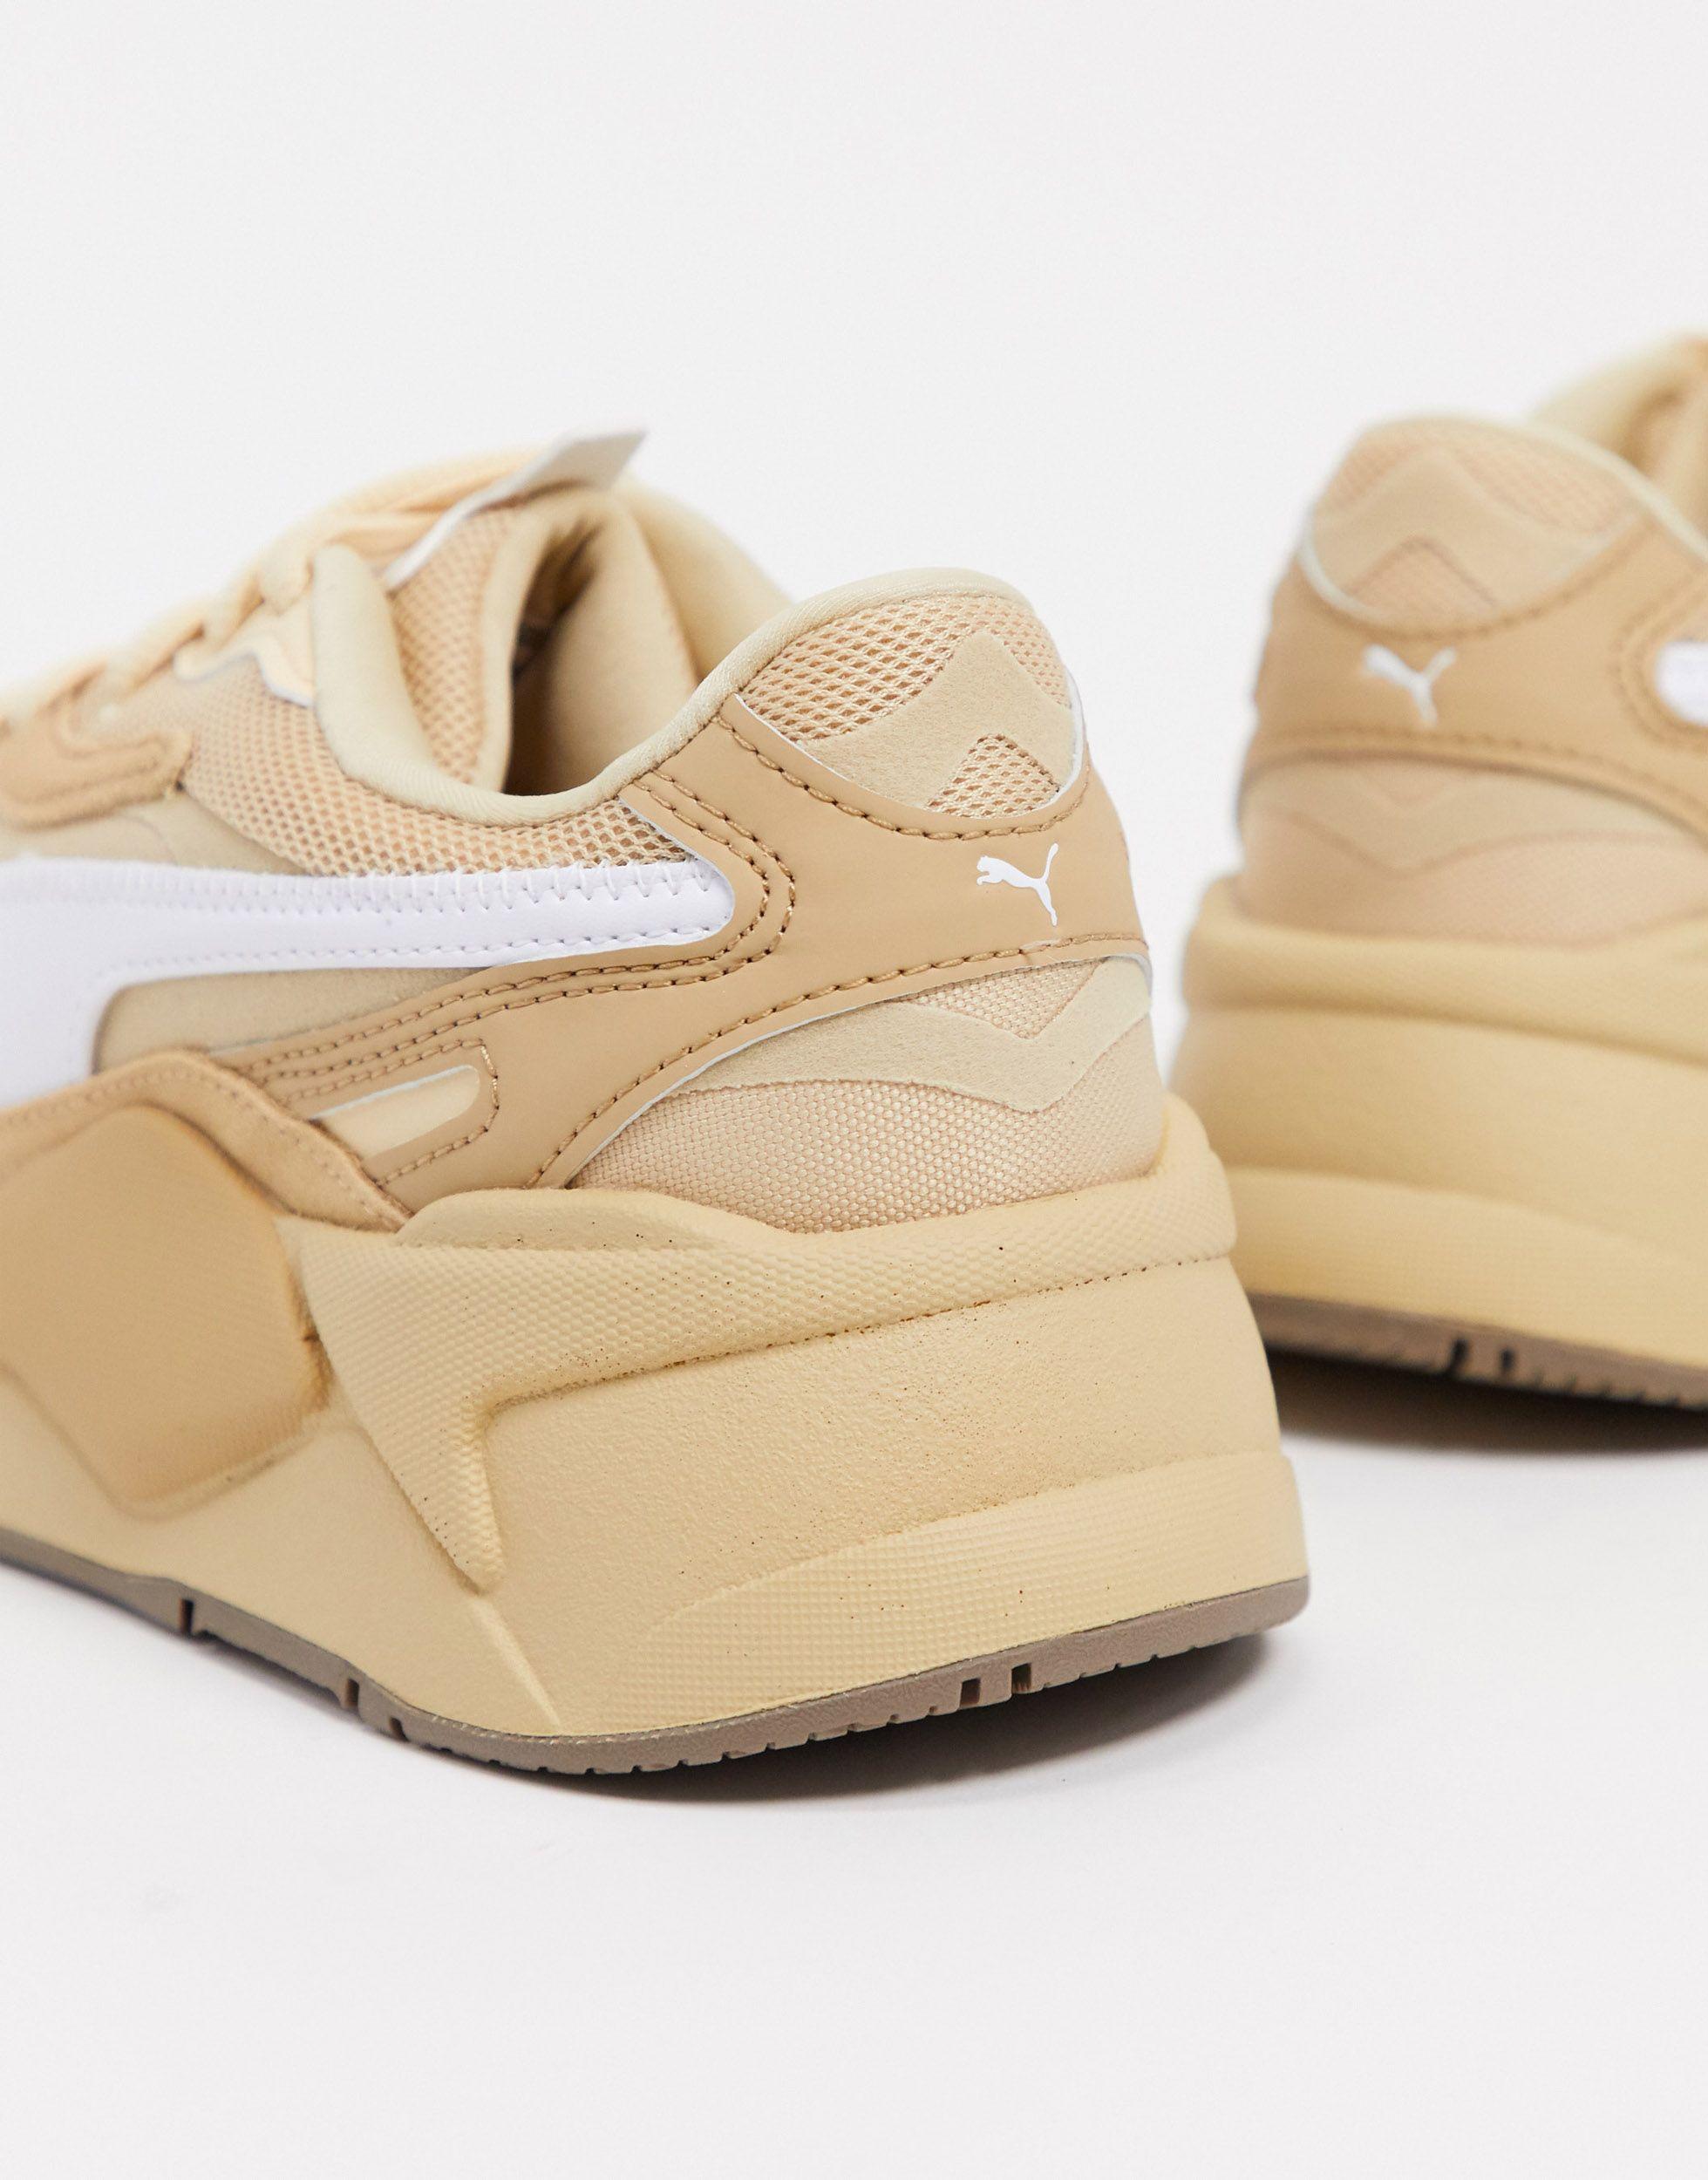 PUMA Rs-x3 Bonfire Trainers in Natural | Lyst